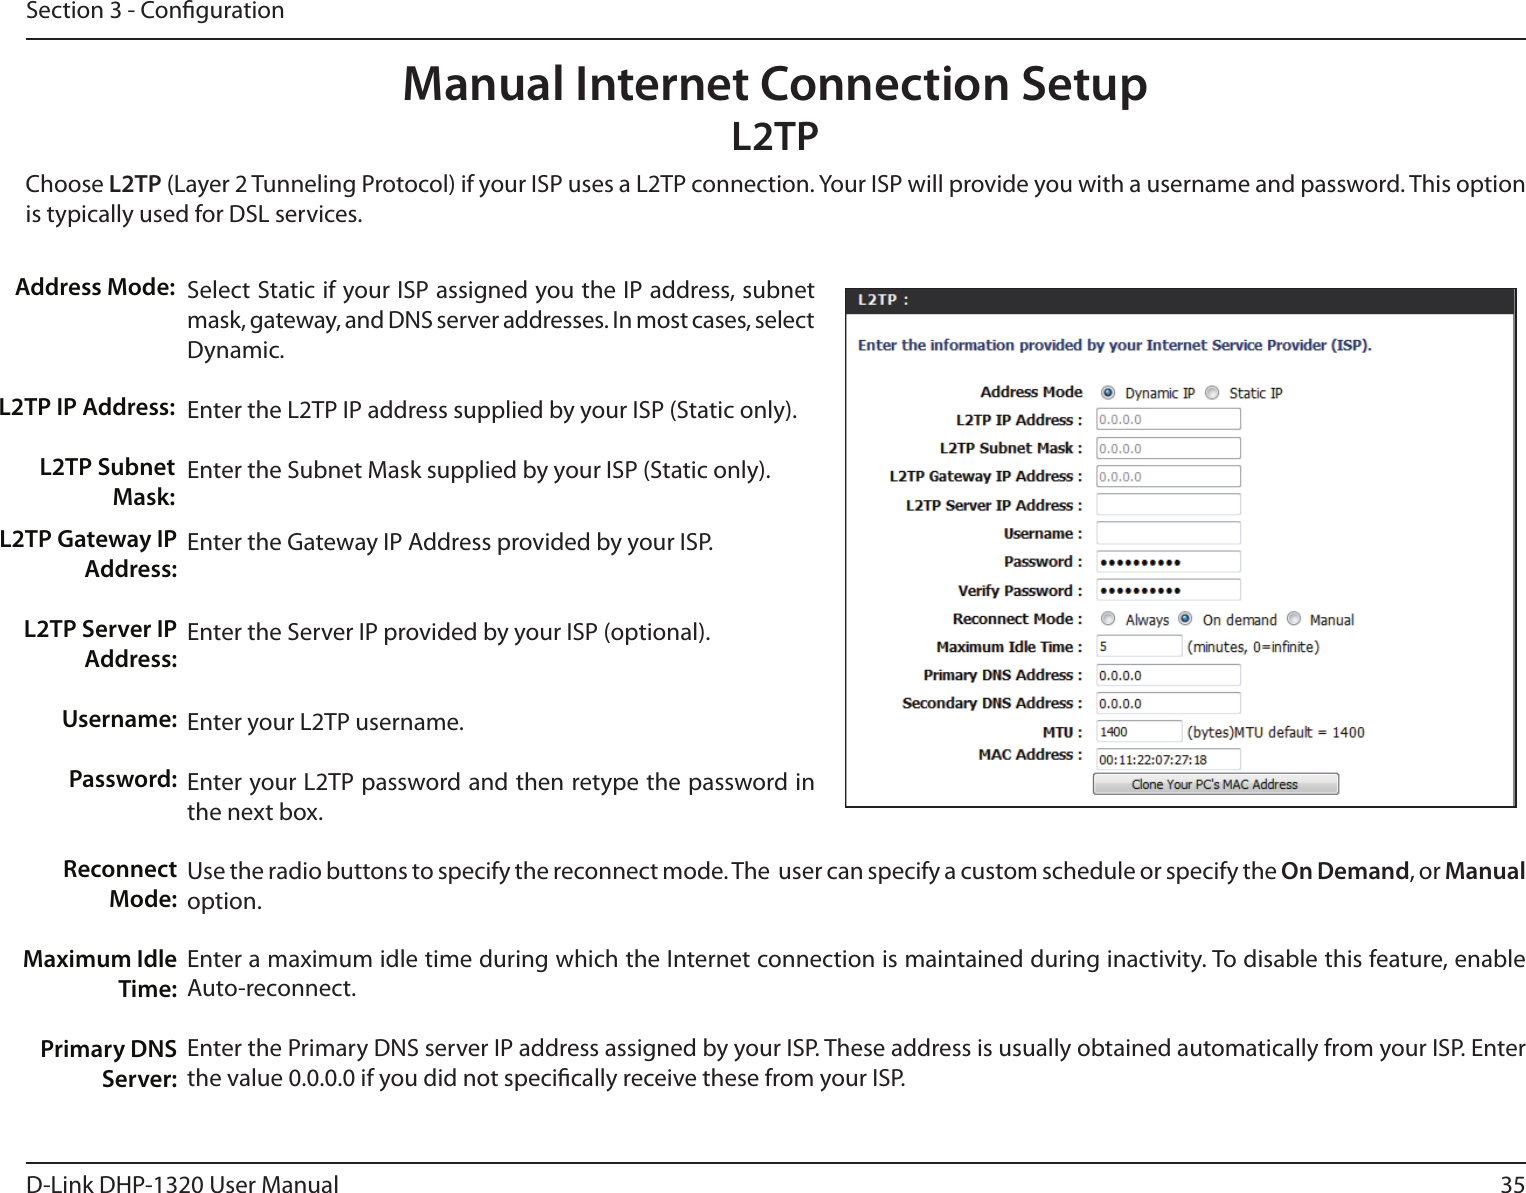 35D-Link DHP-1320 User ManualSection 3 - CongurationSelect Static if your ISP assigned you the IP address, subnet mask, gateway, and DNS server addresses. In most cases, select Dynamic.Enter the L2TP IP address supplied by your ISP (Static only).Enter the Subnet Mask supplied by your ISP (Static only).Enter the Gateway IP Address provided by your ISP.Enter the Server IP provided by your ISP (optional).Enter your L2TP username.Enter your L2TP password and then retype the password in the next box.Use the radio buttons to specify the reconnect mode. The  user can specify a custom schedule or specify the On Demand, or Manual option.Enter a maximum idle time during which the Internet connection is maintained during inactivity. To disable this feature, enable Auto-reconnect.Enter the Primary DNS server IP address assigned by your ISP. These address is usually obtained automatically from your ISP. Enter the value 0.0.0.0 if you did not specically receive these from your ISP.Address Mode:L2TP IP Address:L2TP Subnet Mask:Manual Internet Connection SetupL2TPChoose L2TP (Layer 2 Tunneling Protocol) if your ISP uses a L2TP connection. Your ISP will provide you with a username and password. This option is typically used for DSL services. L2TP Gateway IP Address:L2TP Server IP Address:Username:Password:Reconnect Mode:Maximum Idle Time:Primary DNS Server: